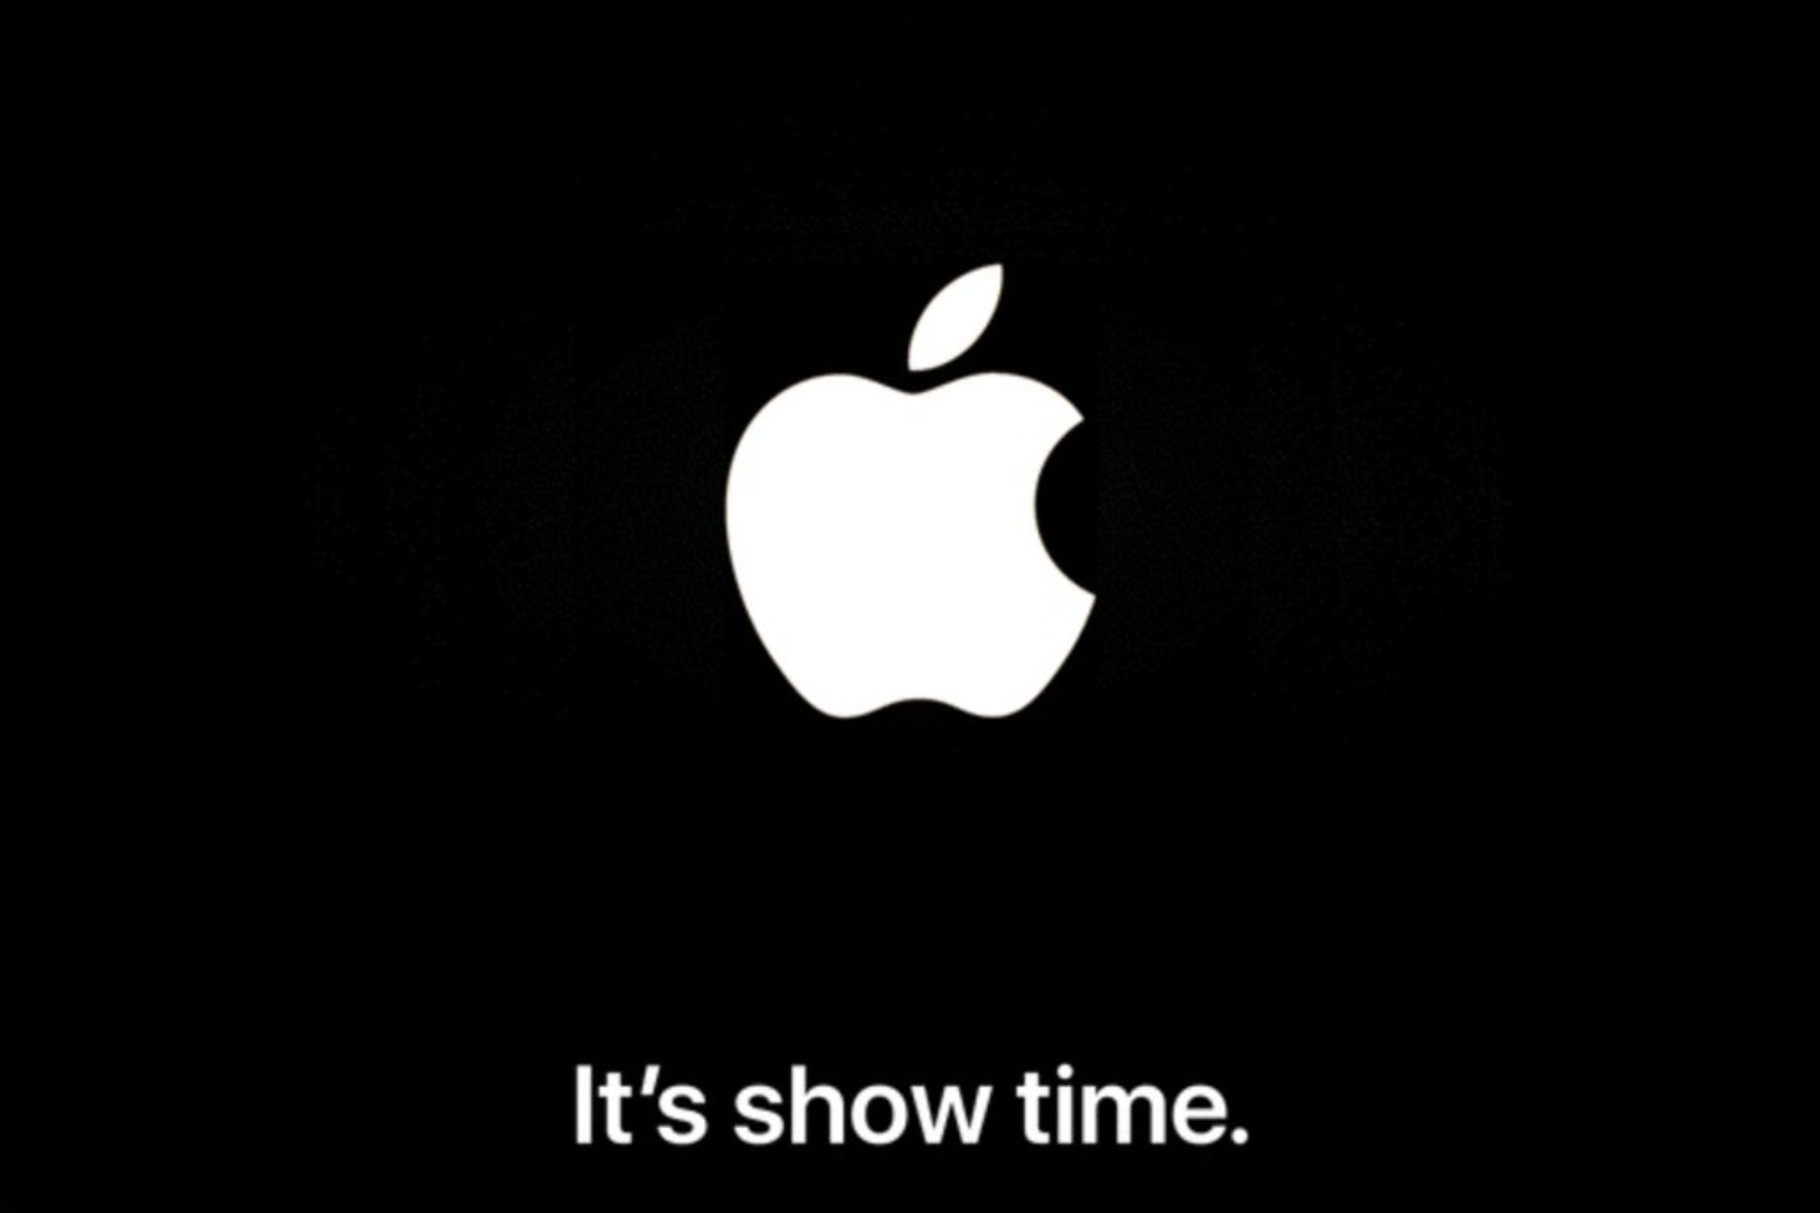 Apple Special Event: It’s show time